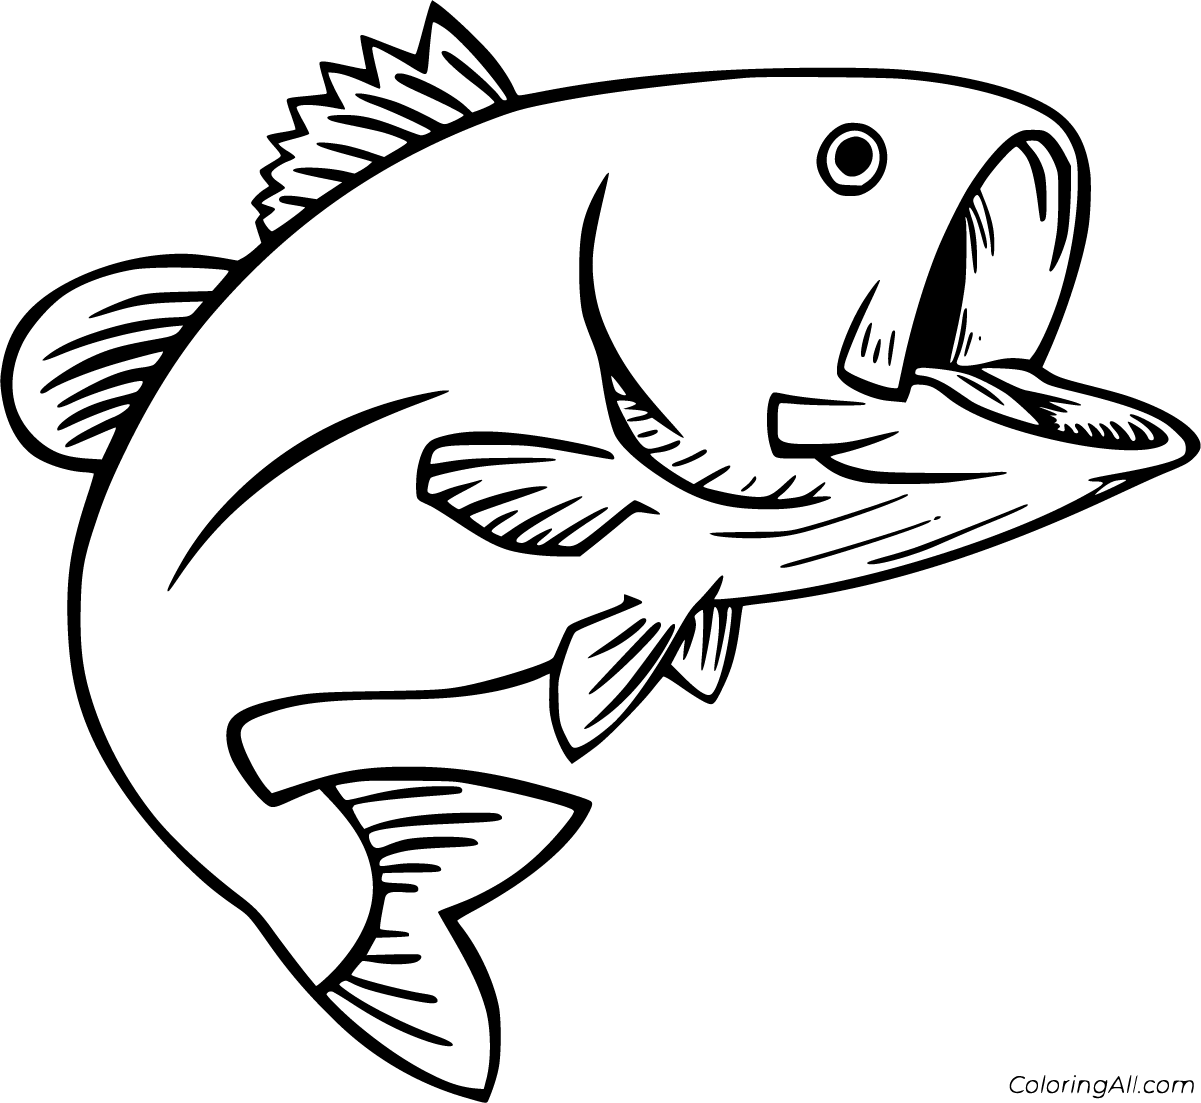 Bass Coloring Pages - ColoringAll